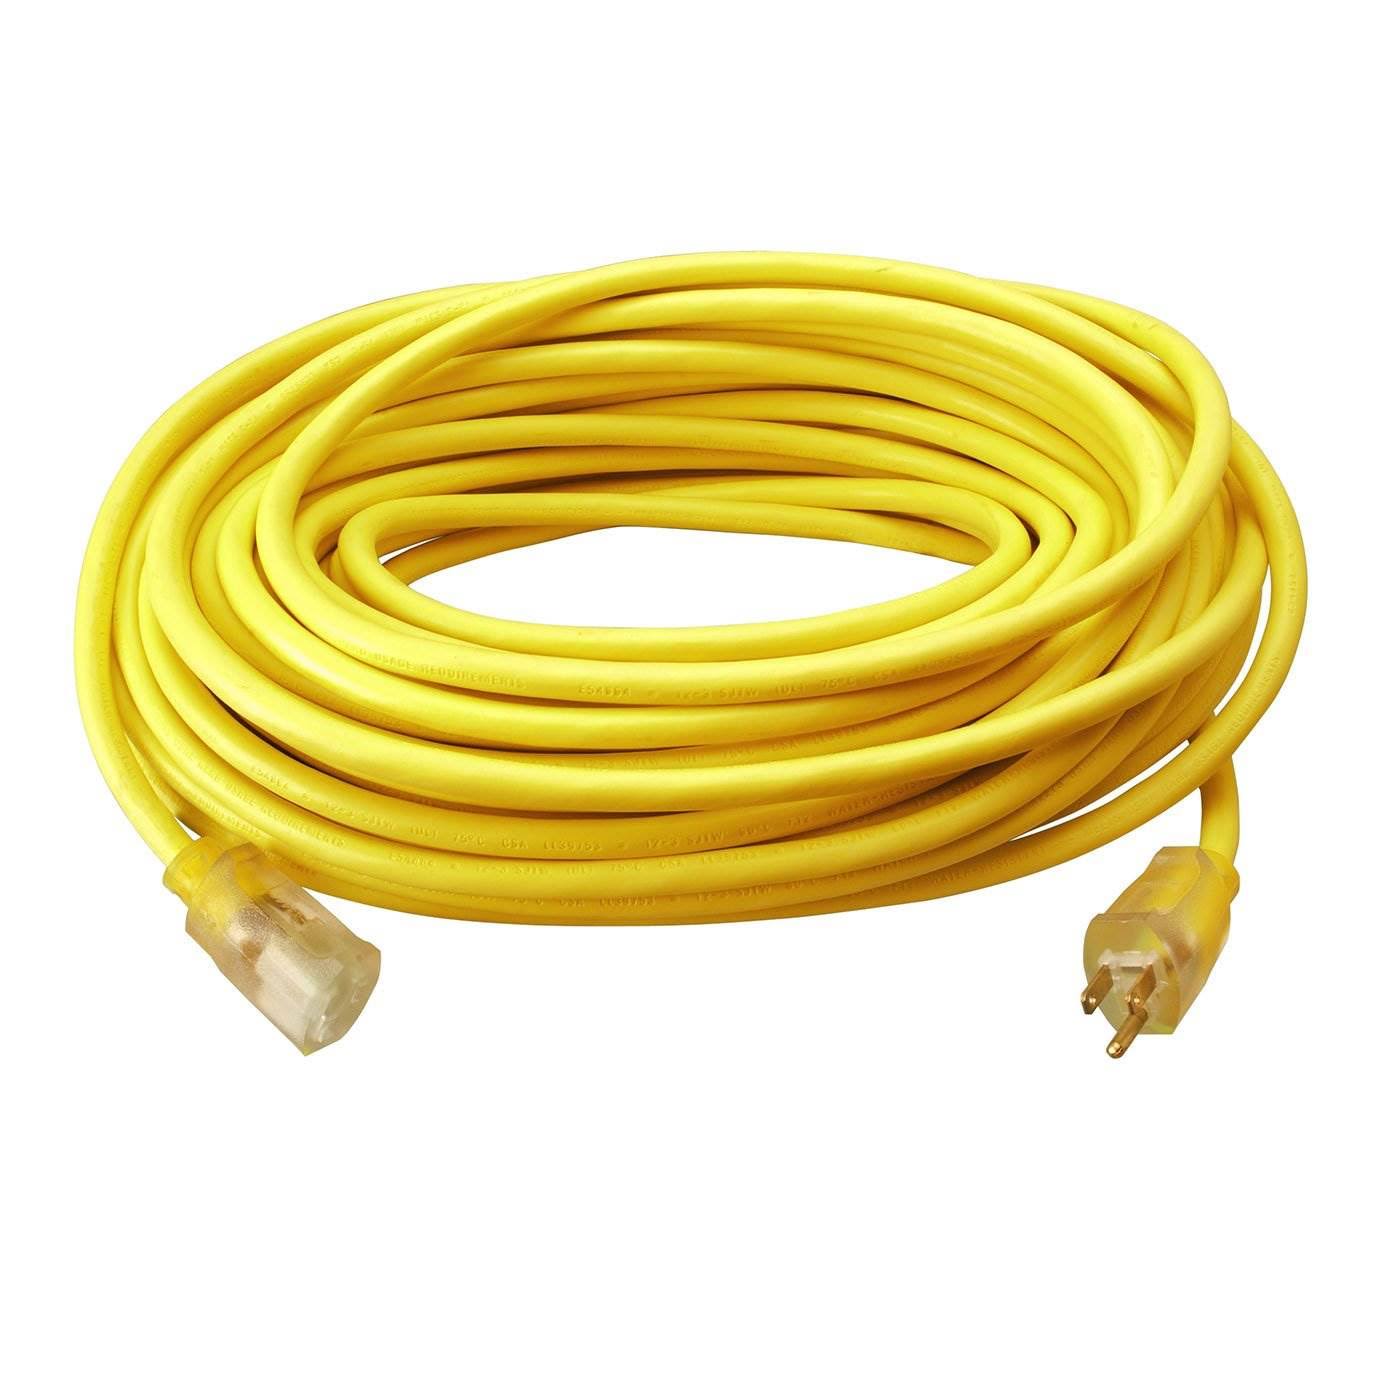 Coleman Cable Vinyl Outdoor Extension Cord with Lighted End - 100'